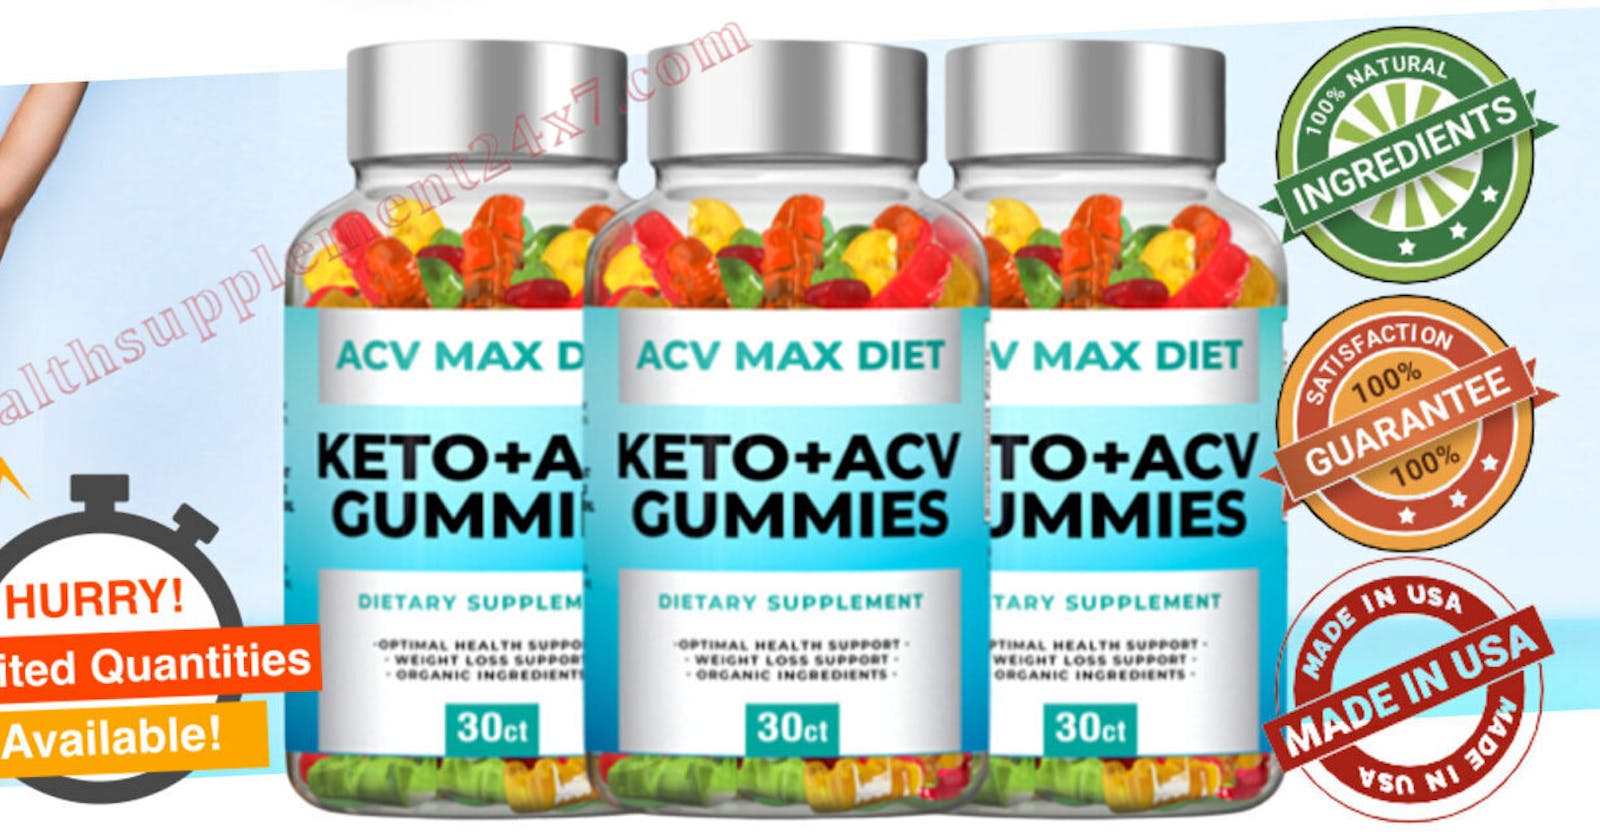 ACV Max Diet Keto Gummies [#1 Premium Dietary Supplement] To Achieve Weight And Fat Loss In Safe Way 2023 Report(Spam Or Legit)